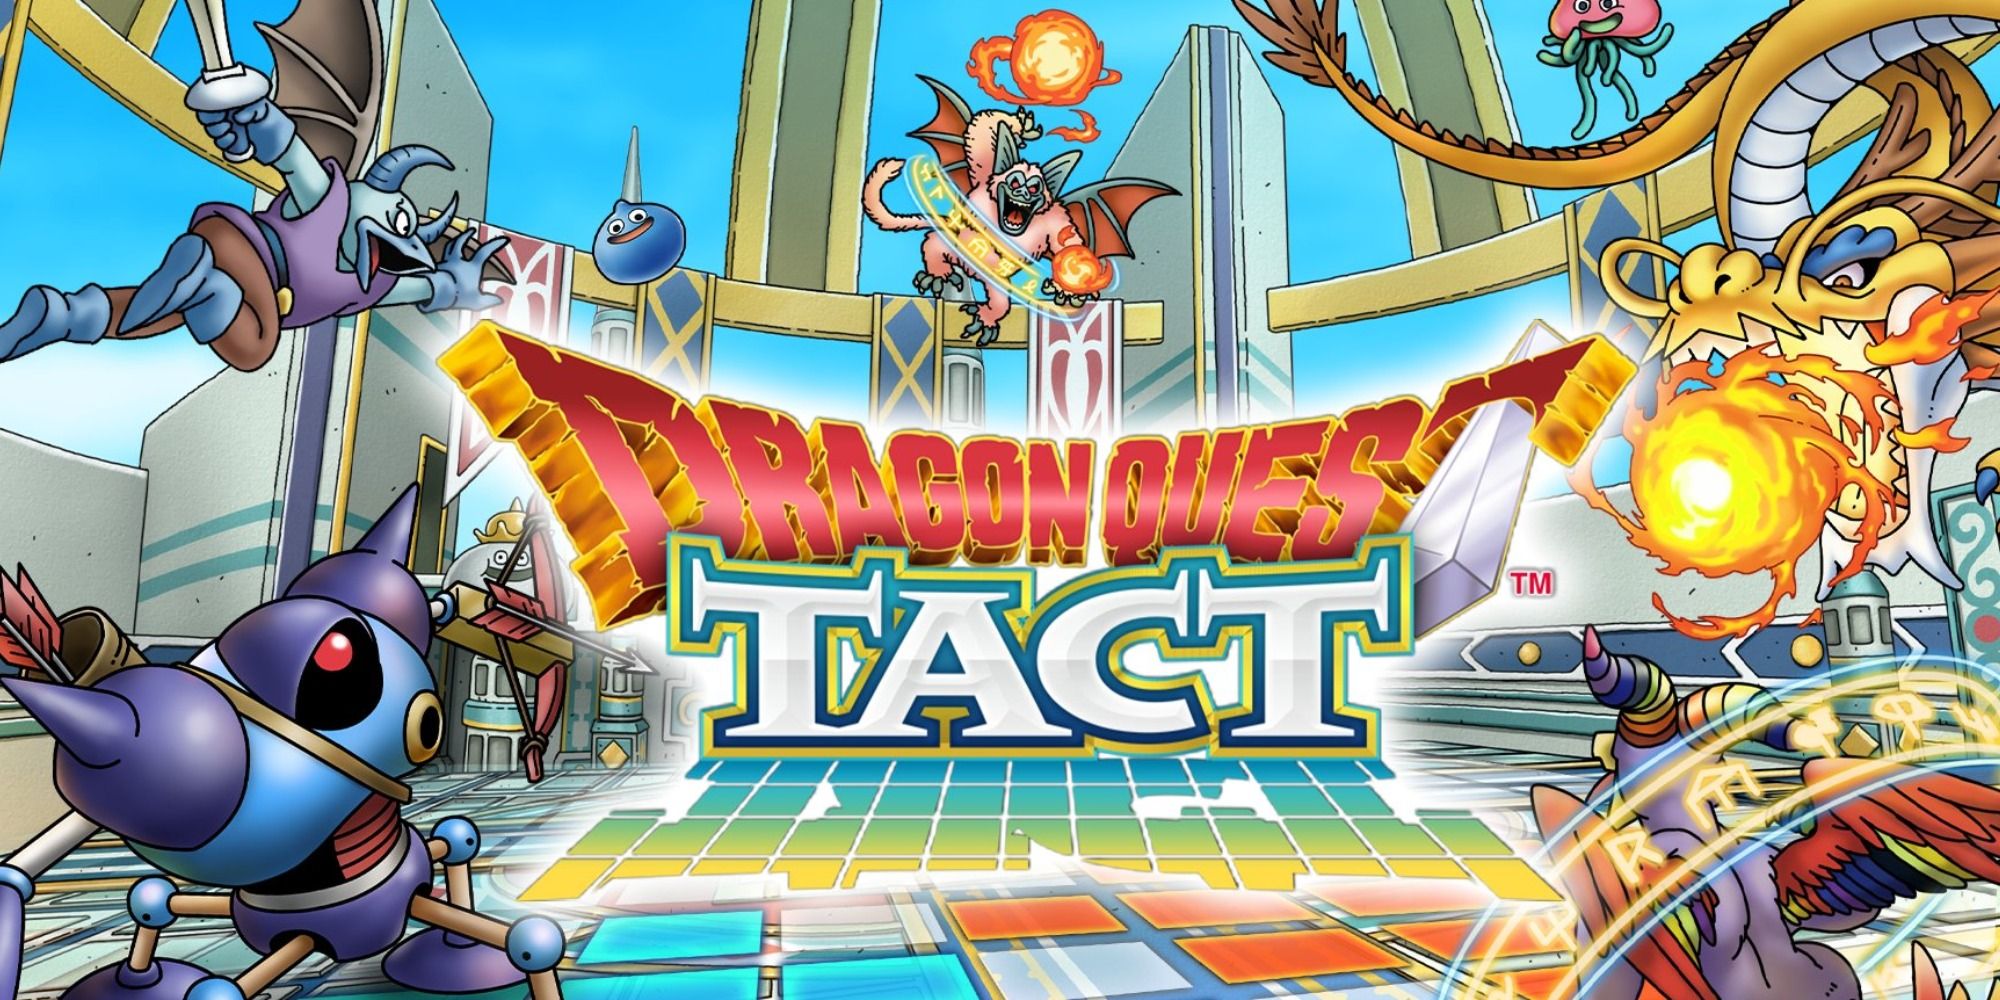 Dragon Quest Tact: Tips, Tricks Strategies for New Players